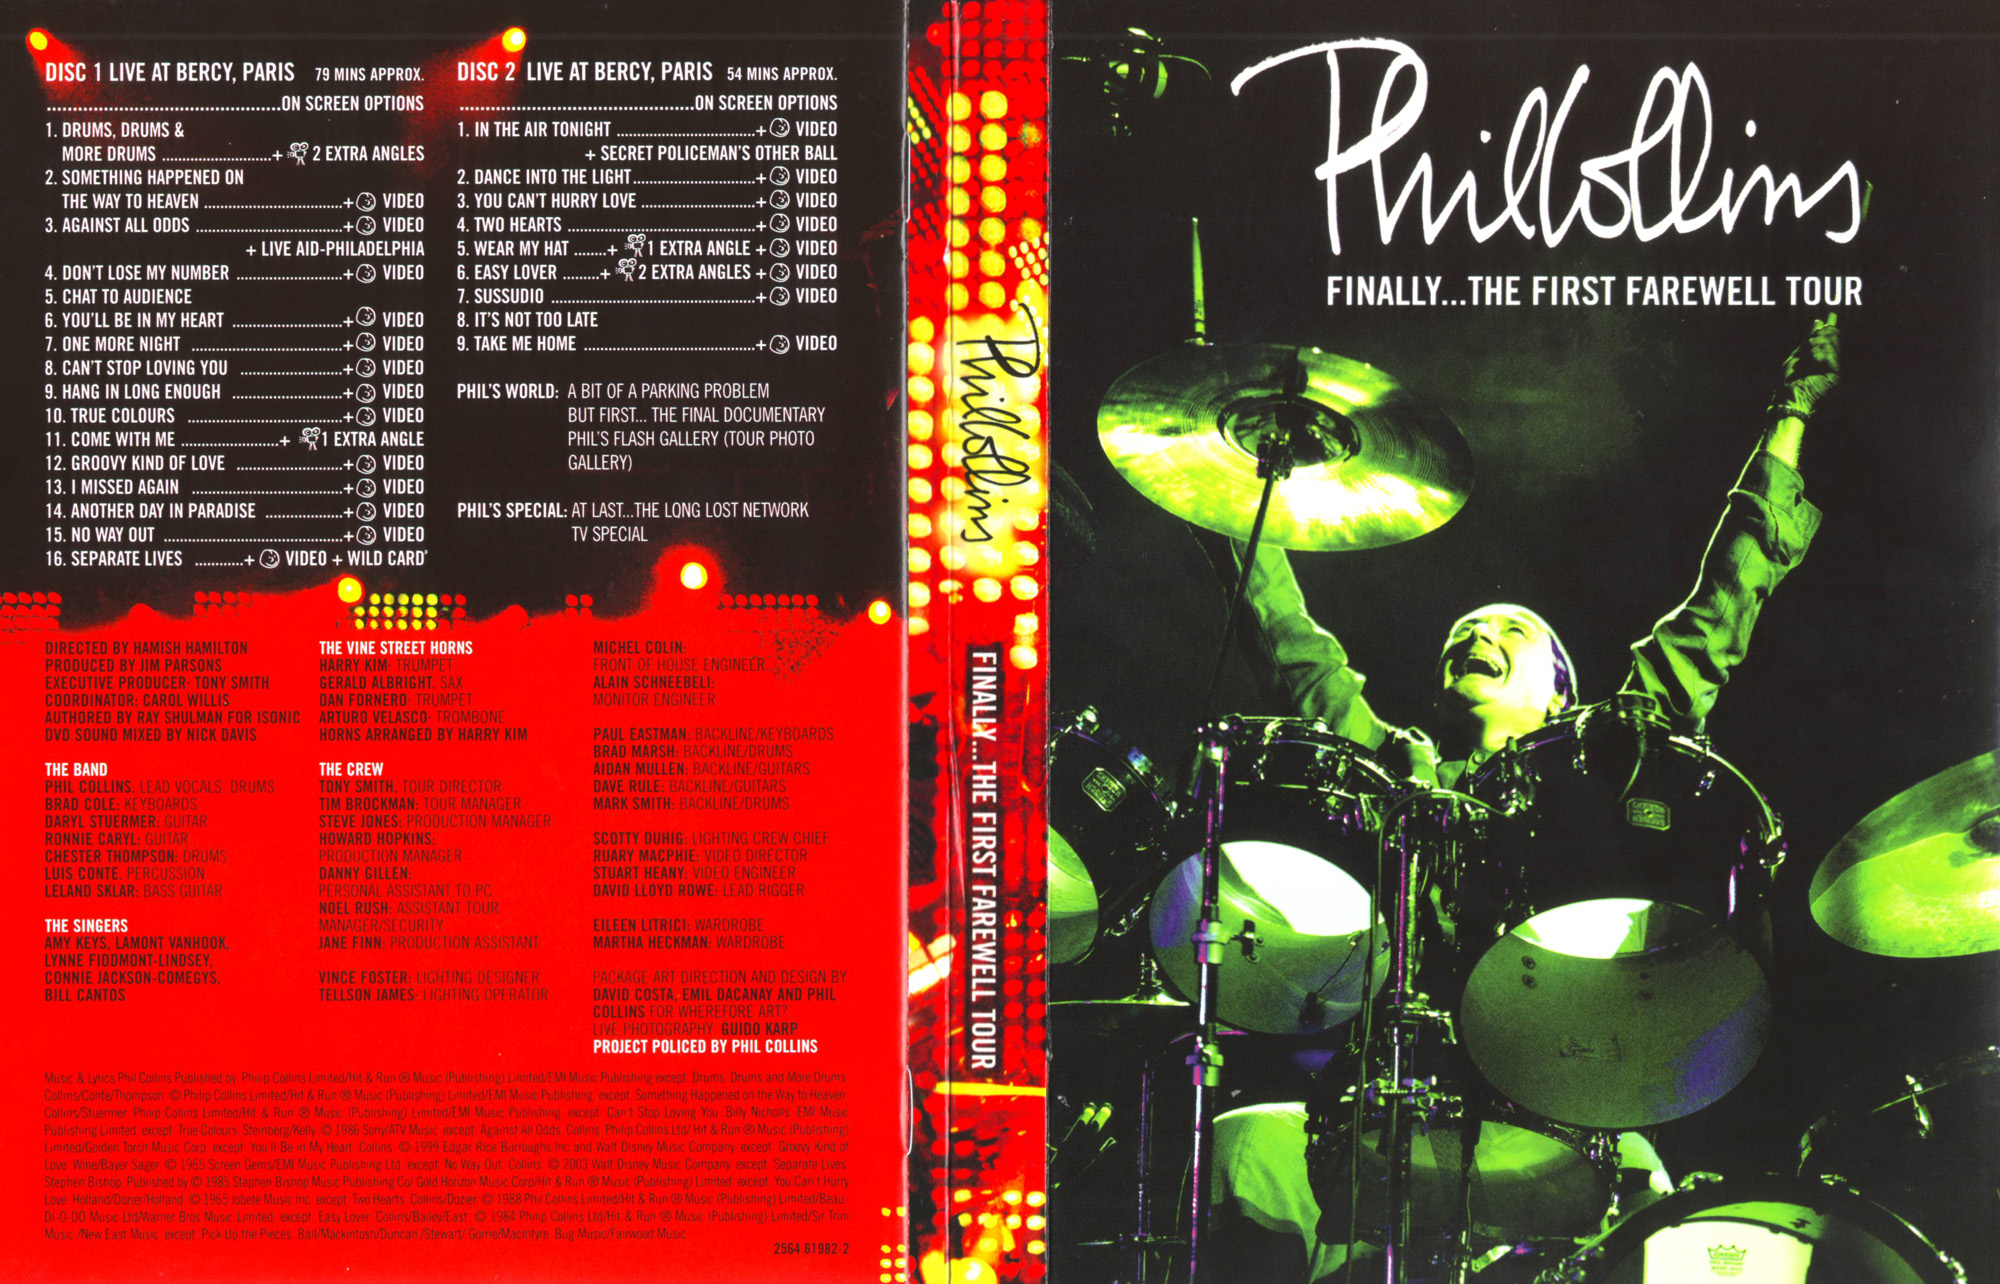 Jaquette DVD Phil Collins Finally The First Farewell Tour v2